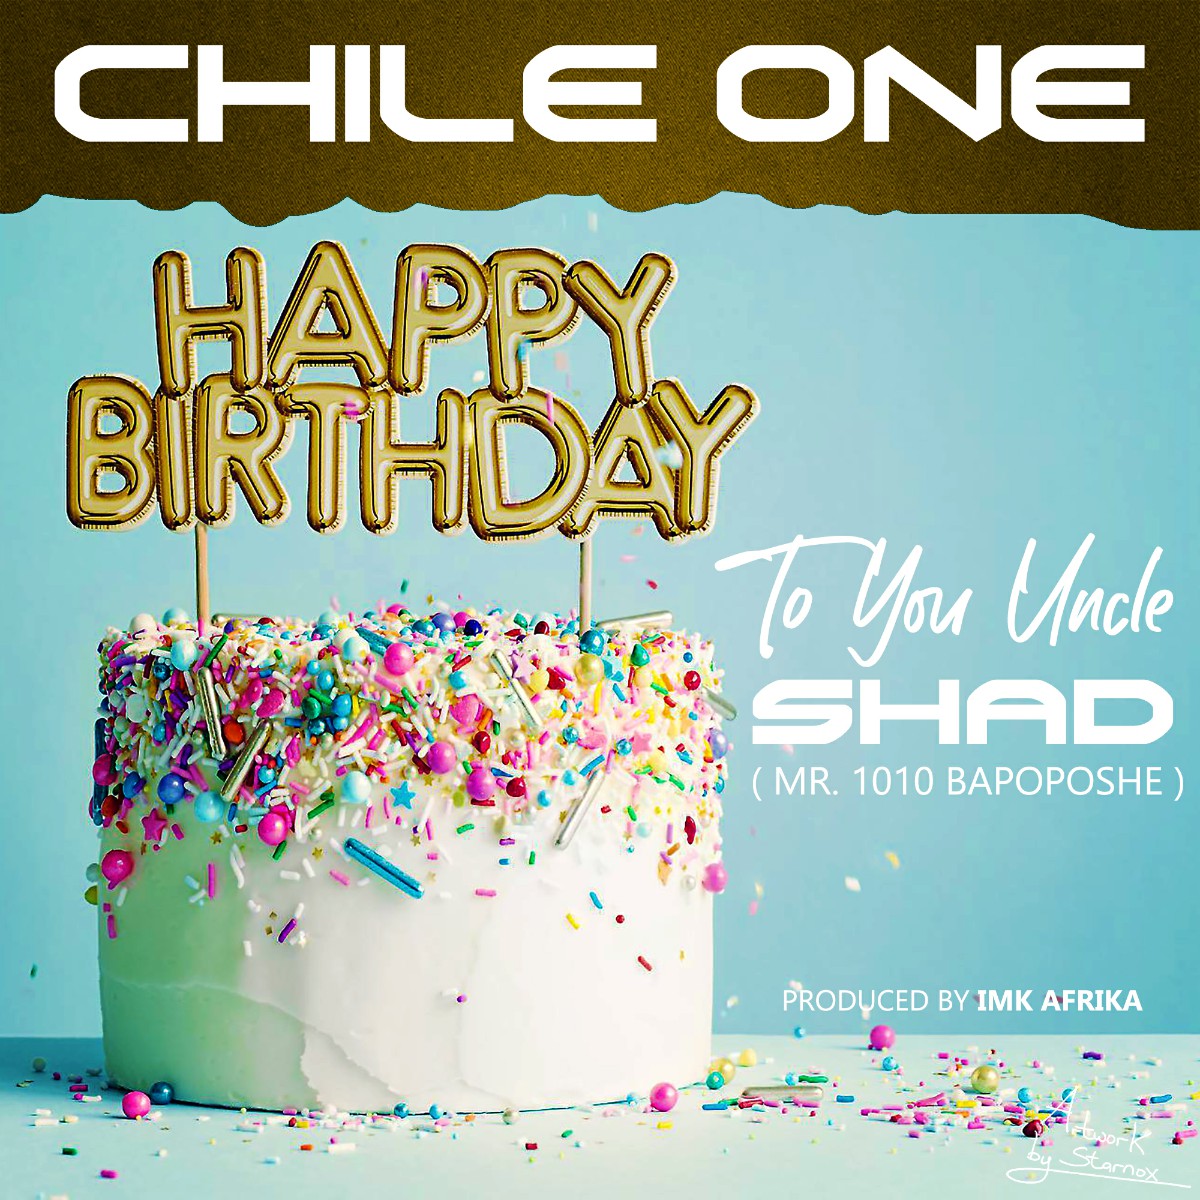 Chile One - Happy Birthday To You Uncle Shad